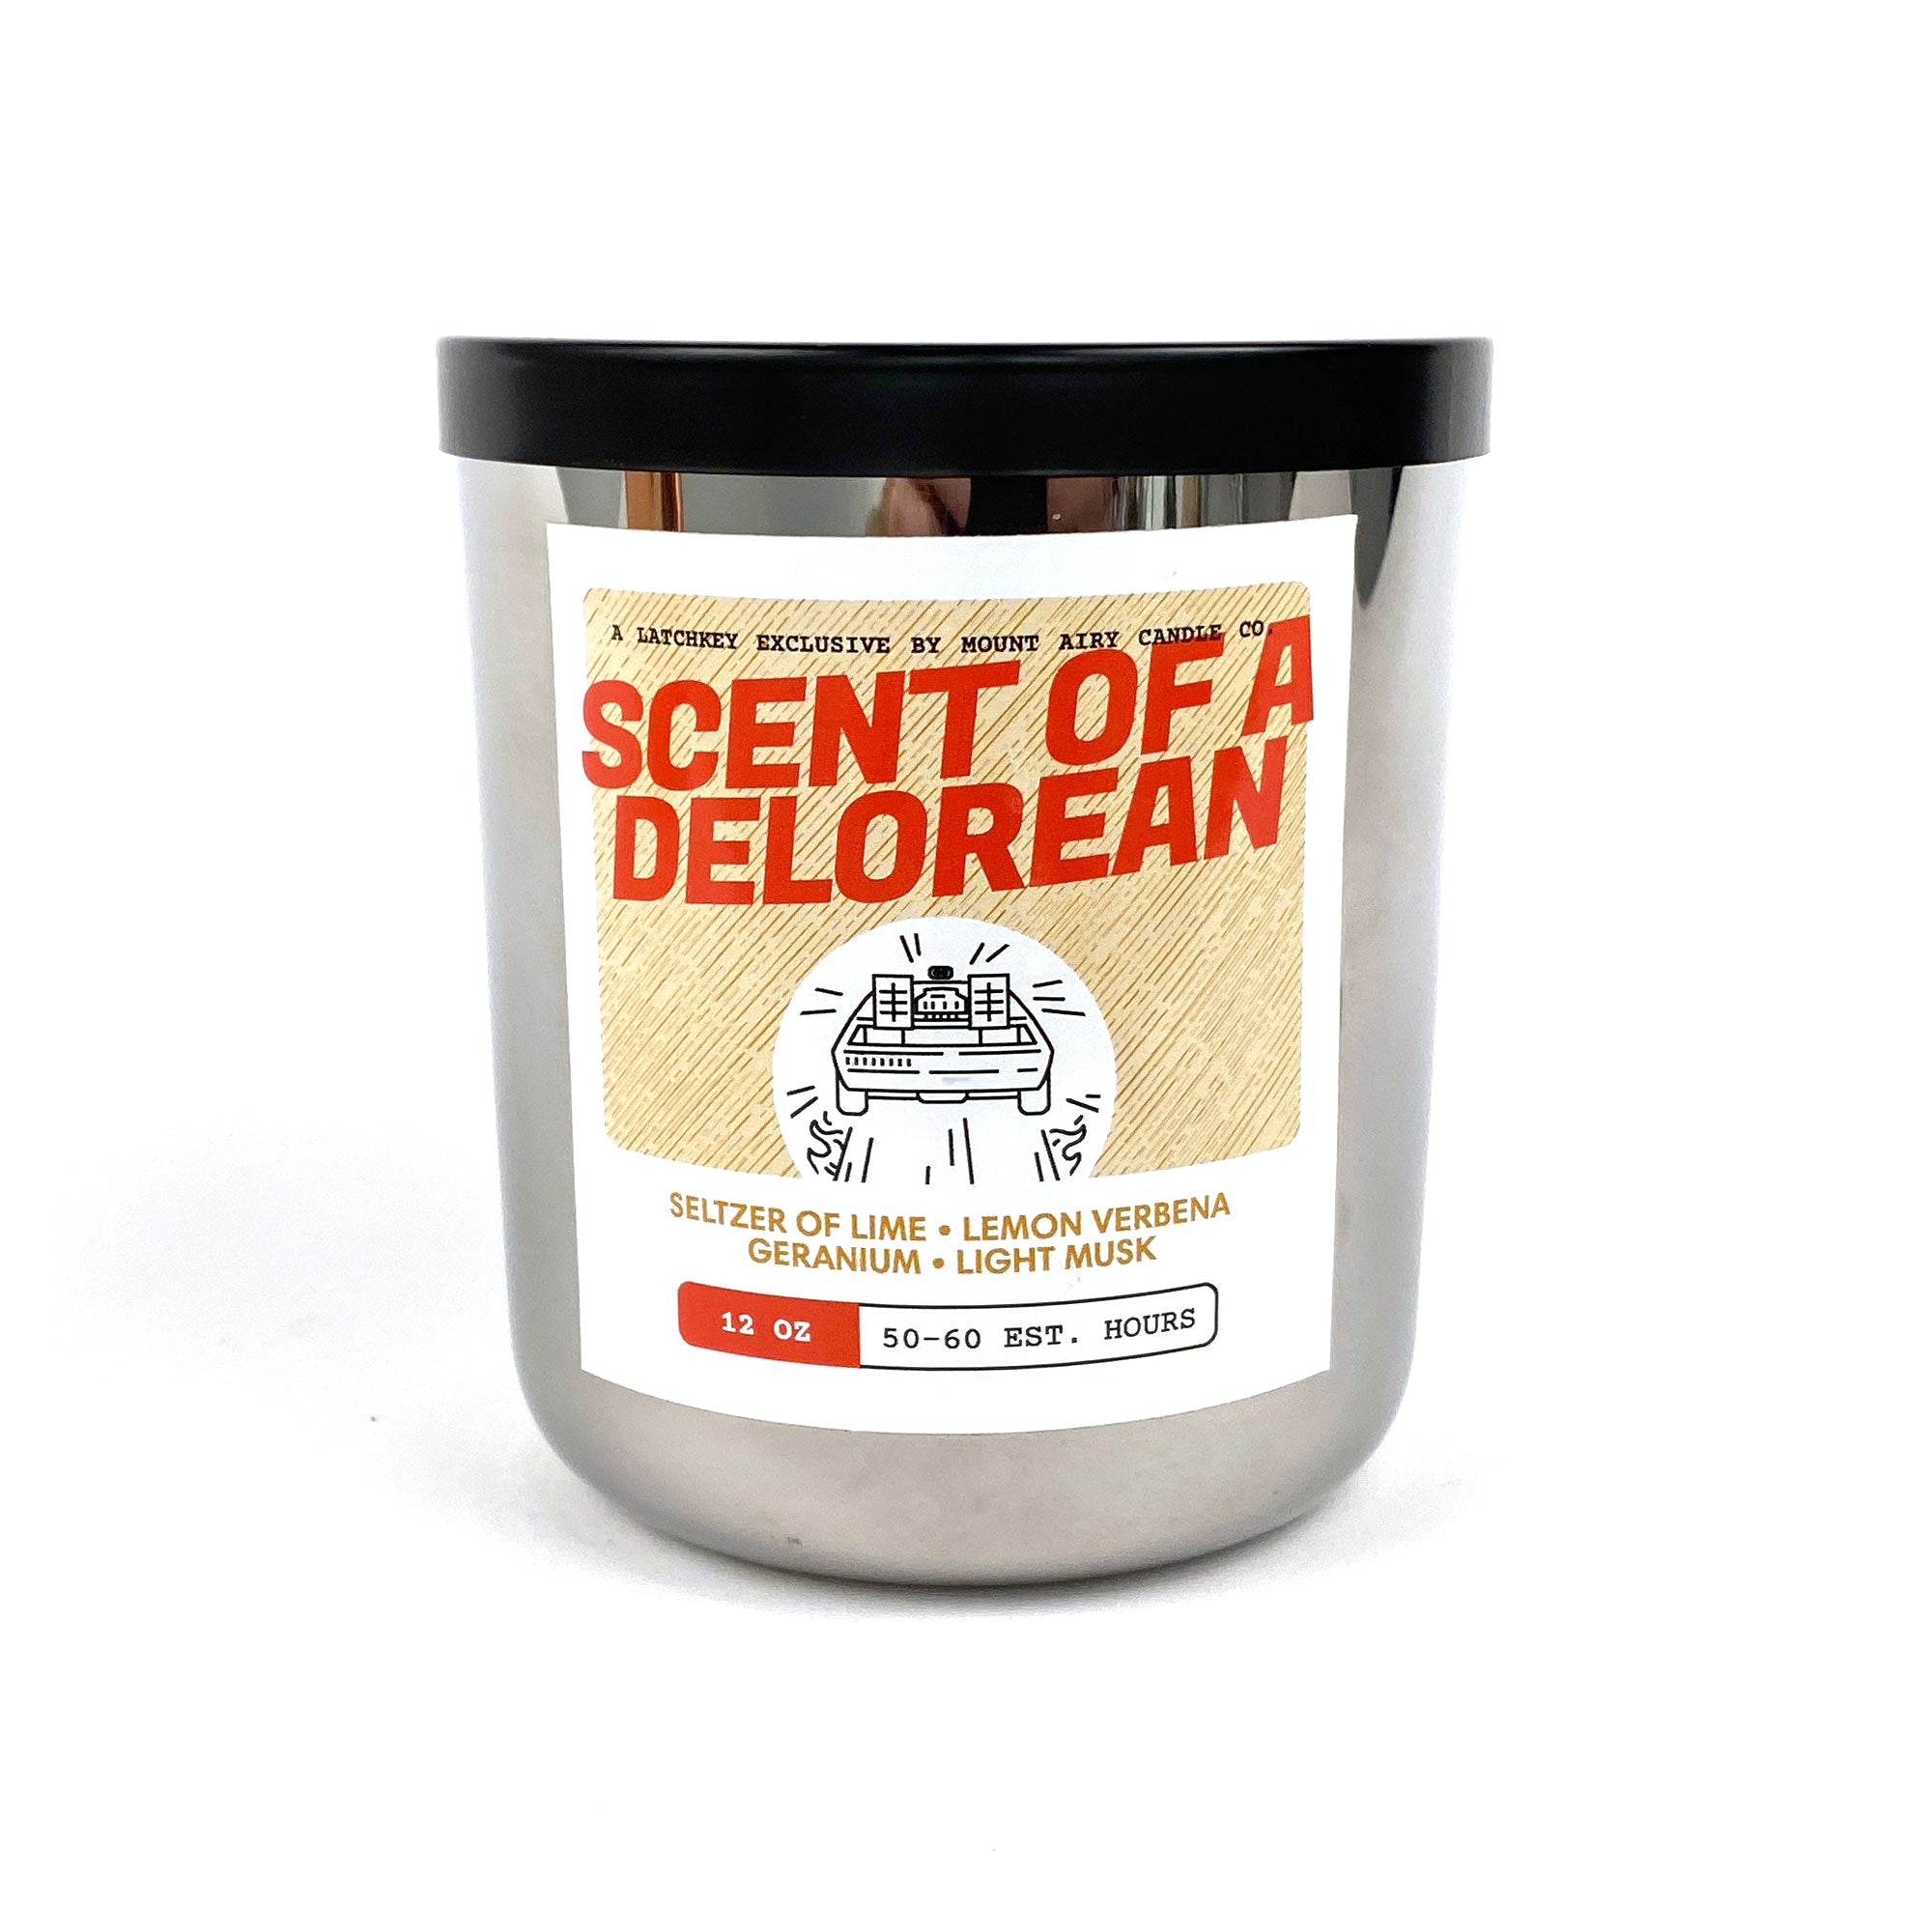 "Scent of a Delorean" Candle by Mount Airy Candle Co.